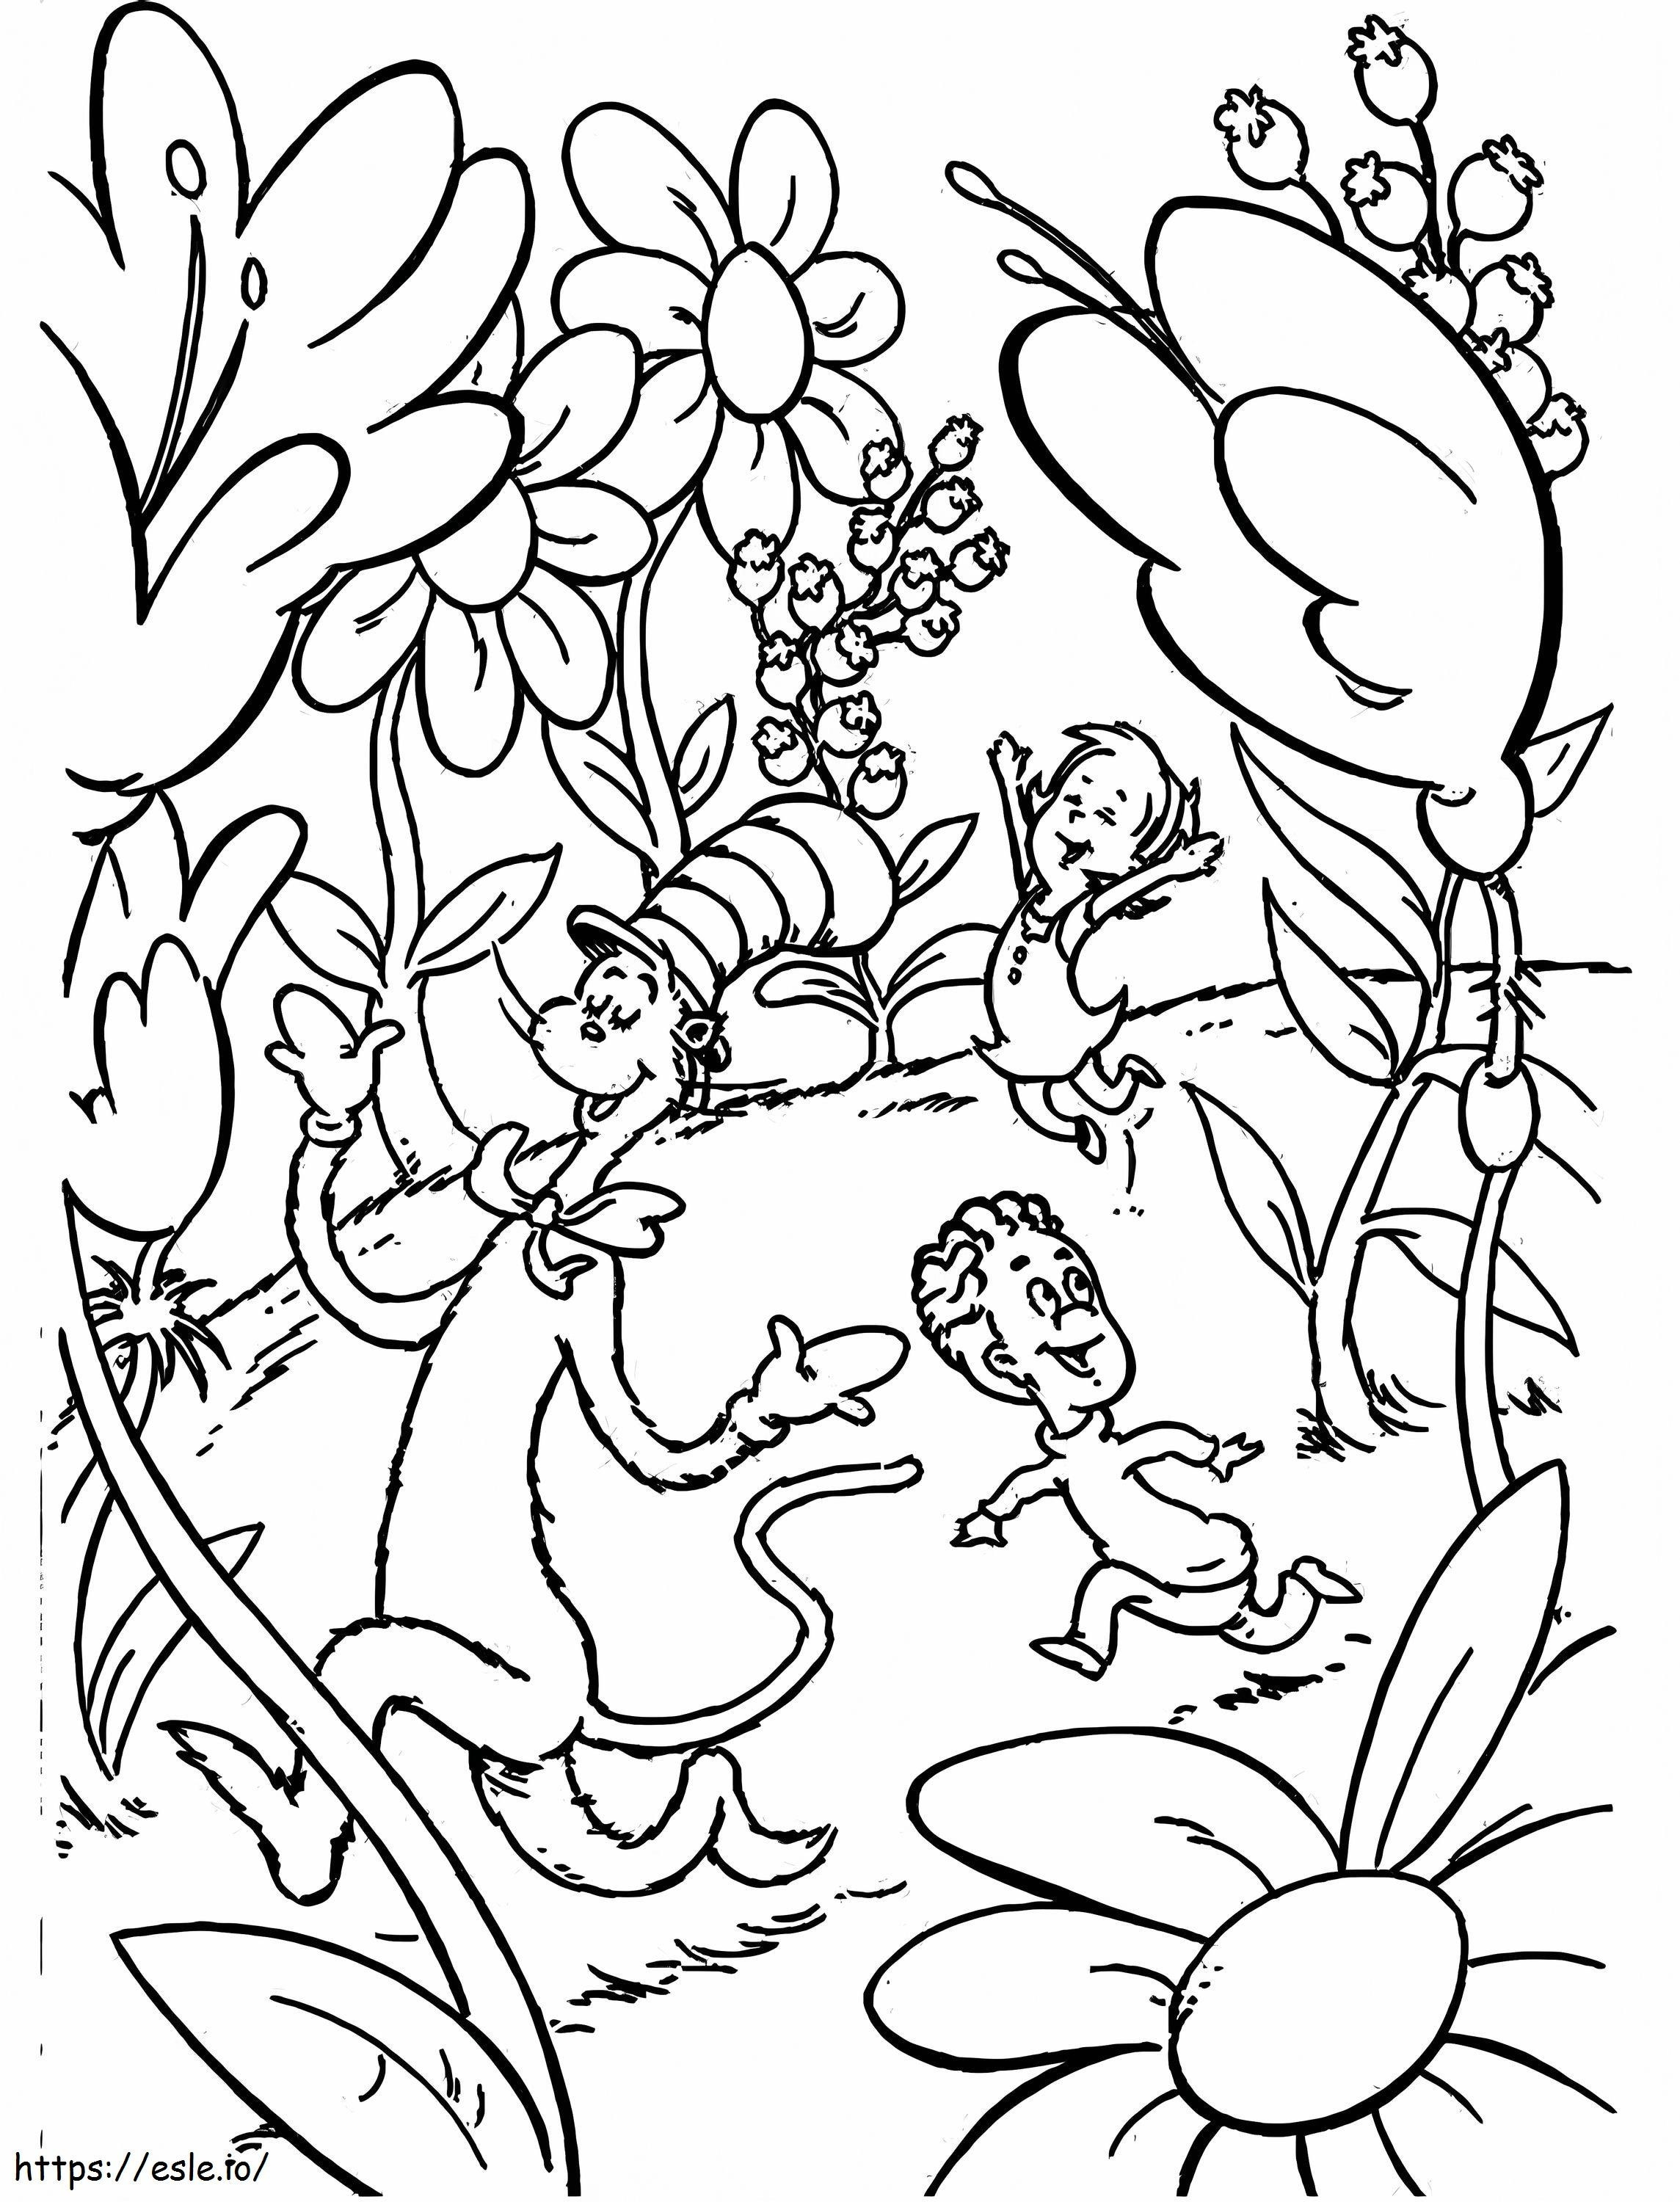 1567671086 Cat Playing In The Garden A4 coloring page